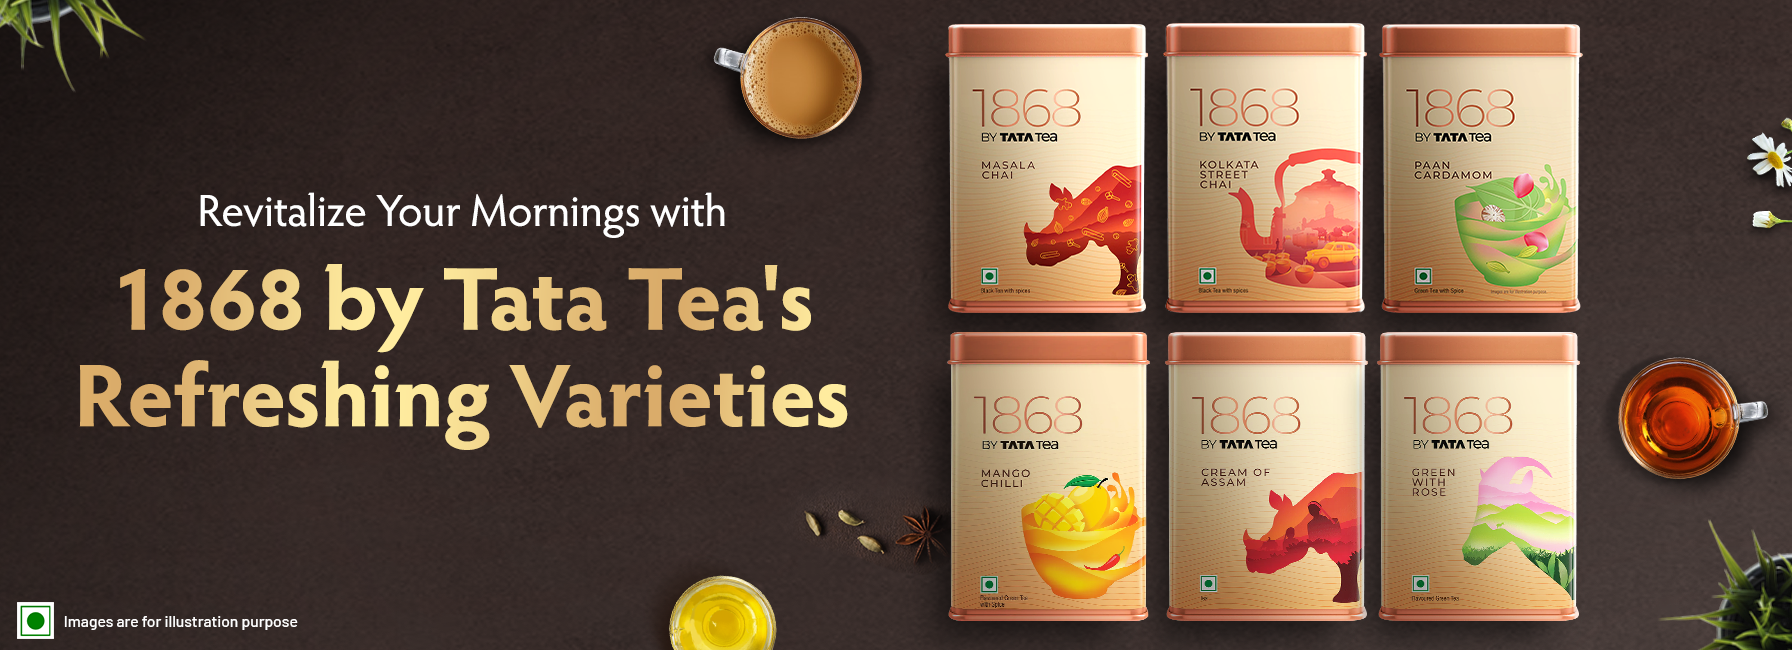 Revitalize Your Mornings with 1868 by Tata Tea's Refreshing Varieties